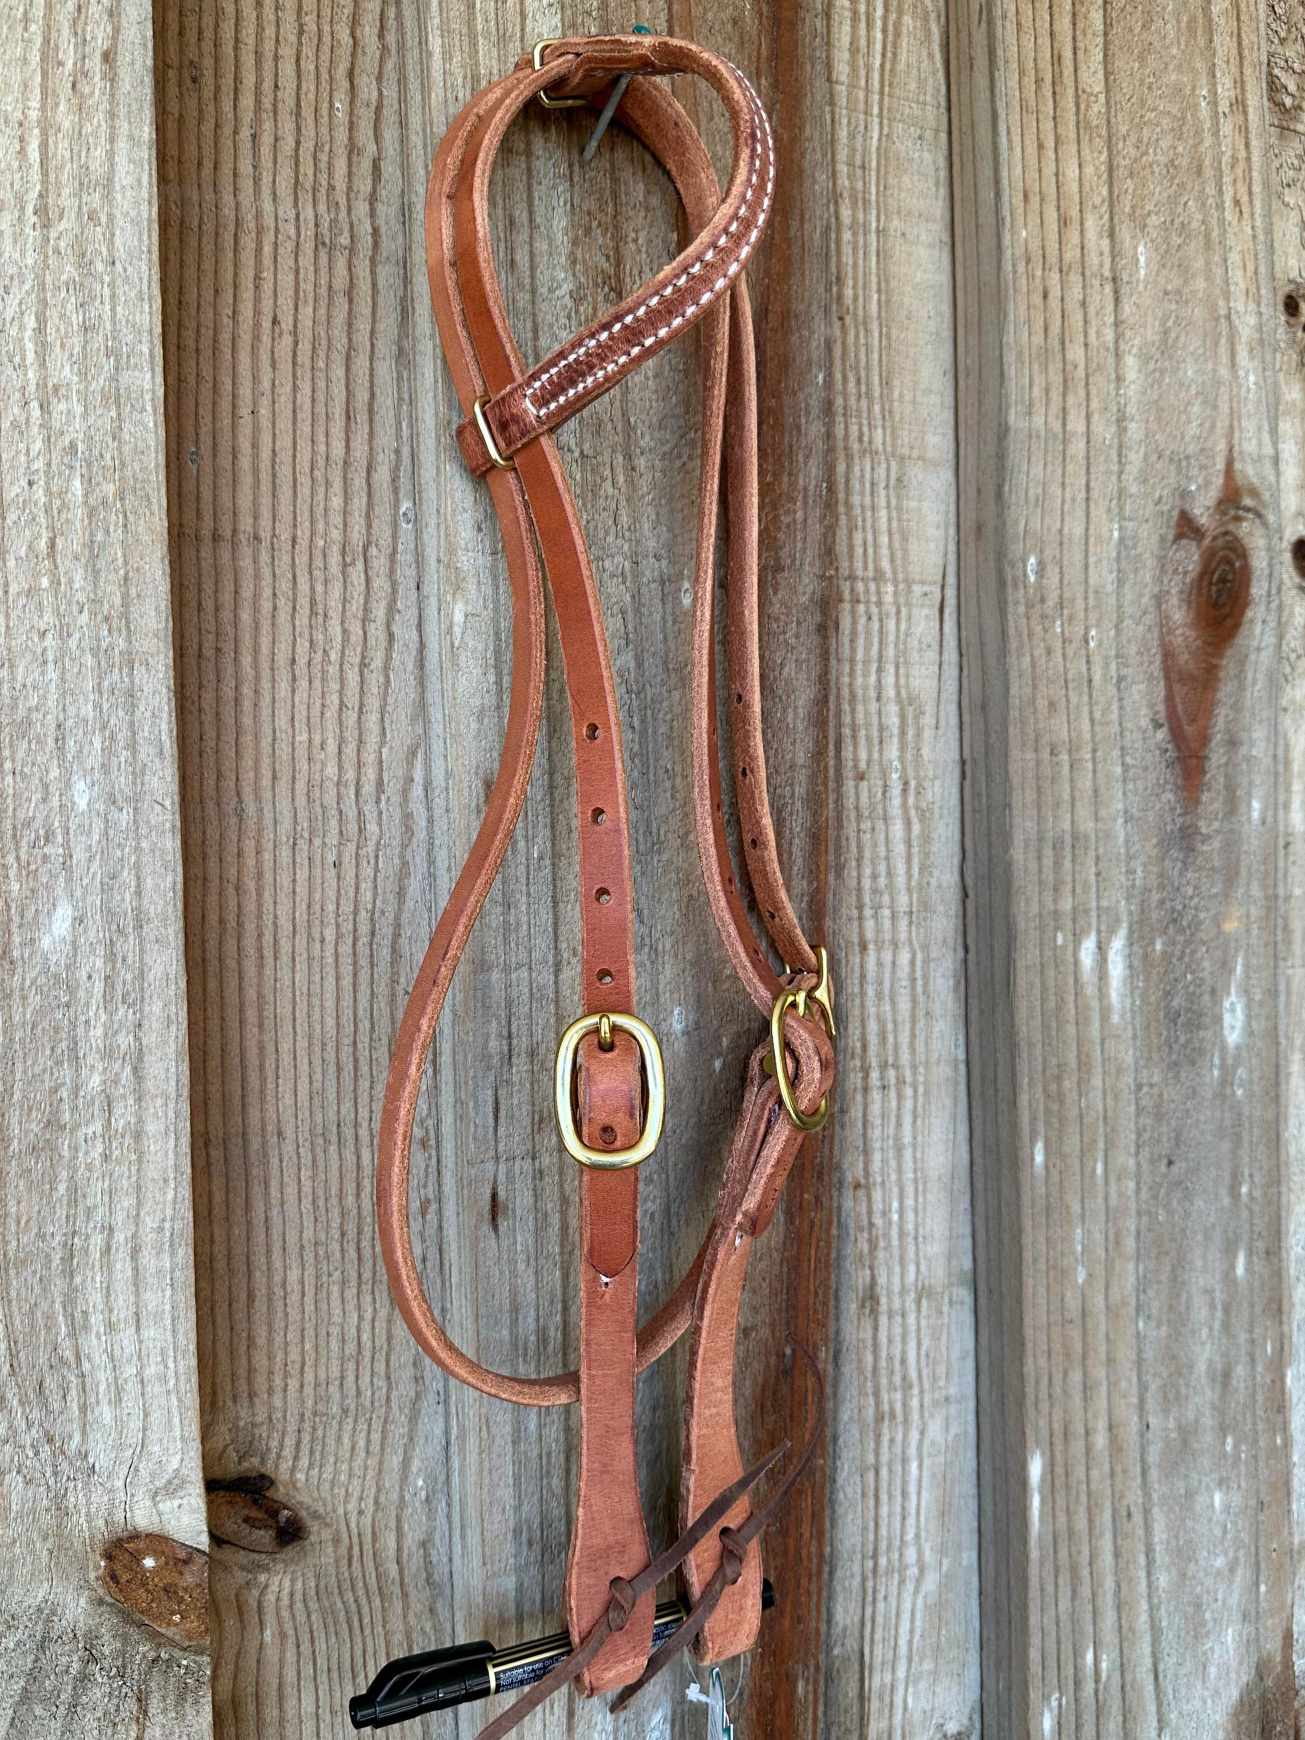 Western Bridle One Ear with Throat Lash Harness Leather USA Made